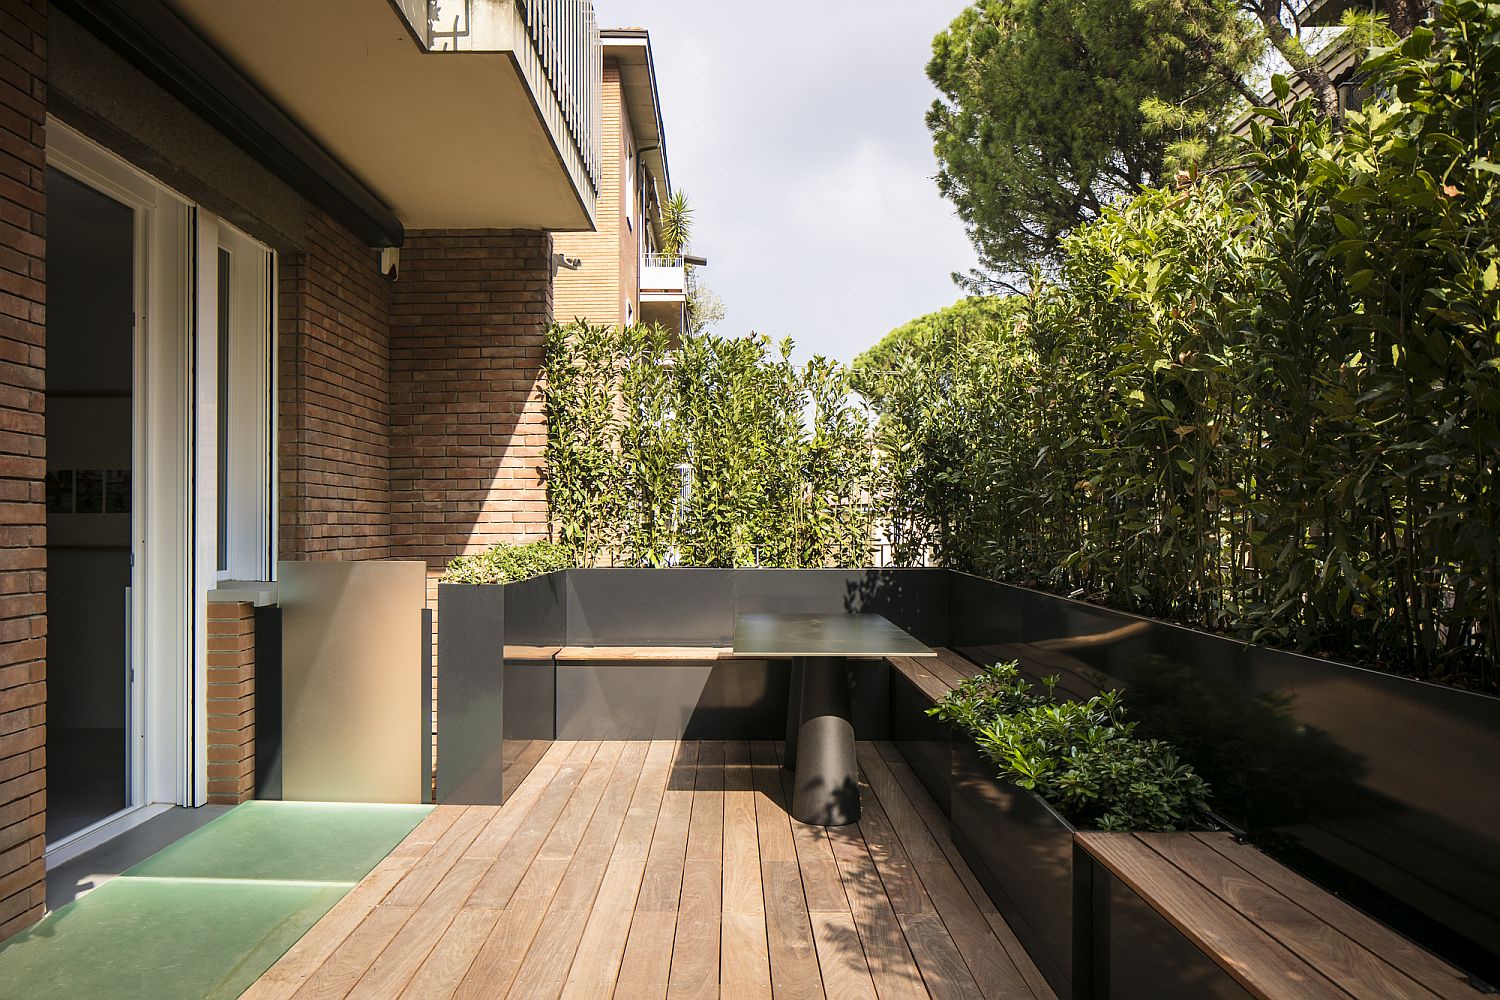 Wooden deck outside the kitchen and the livig area of the Italian apartment